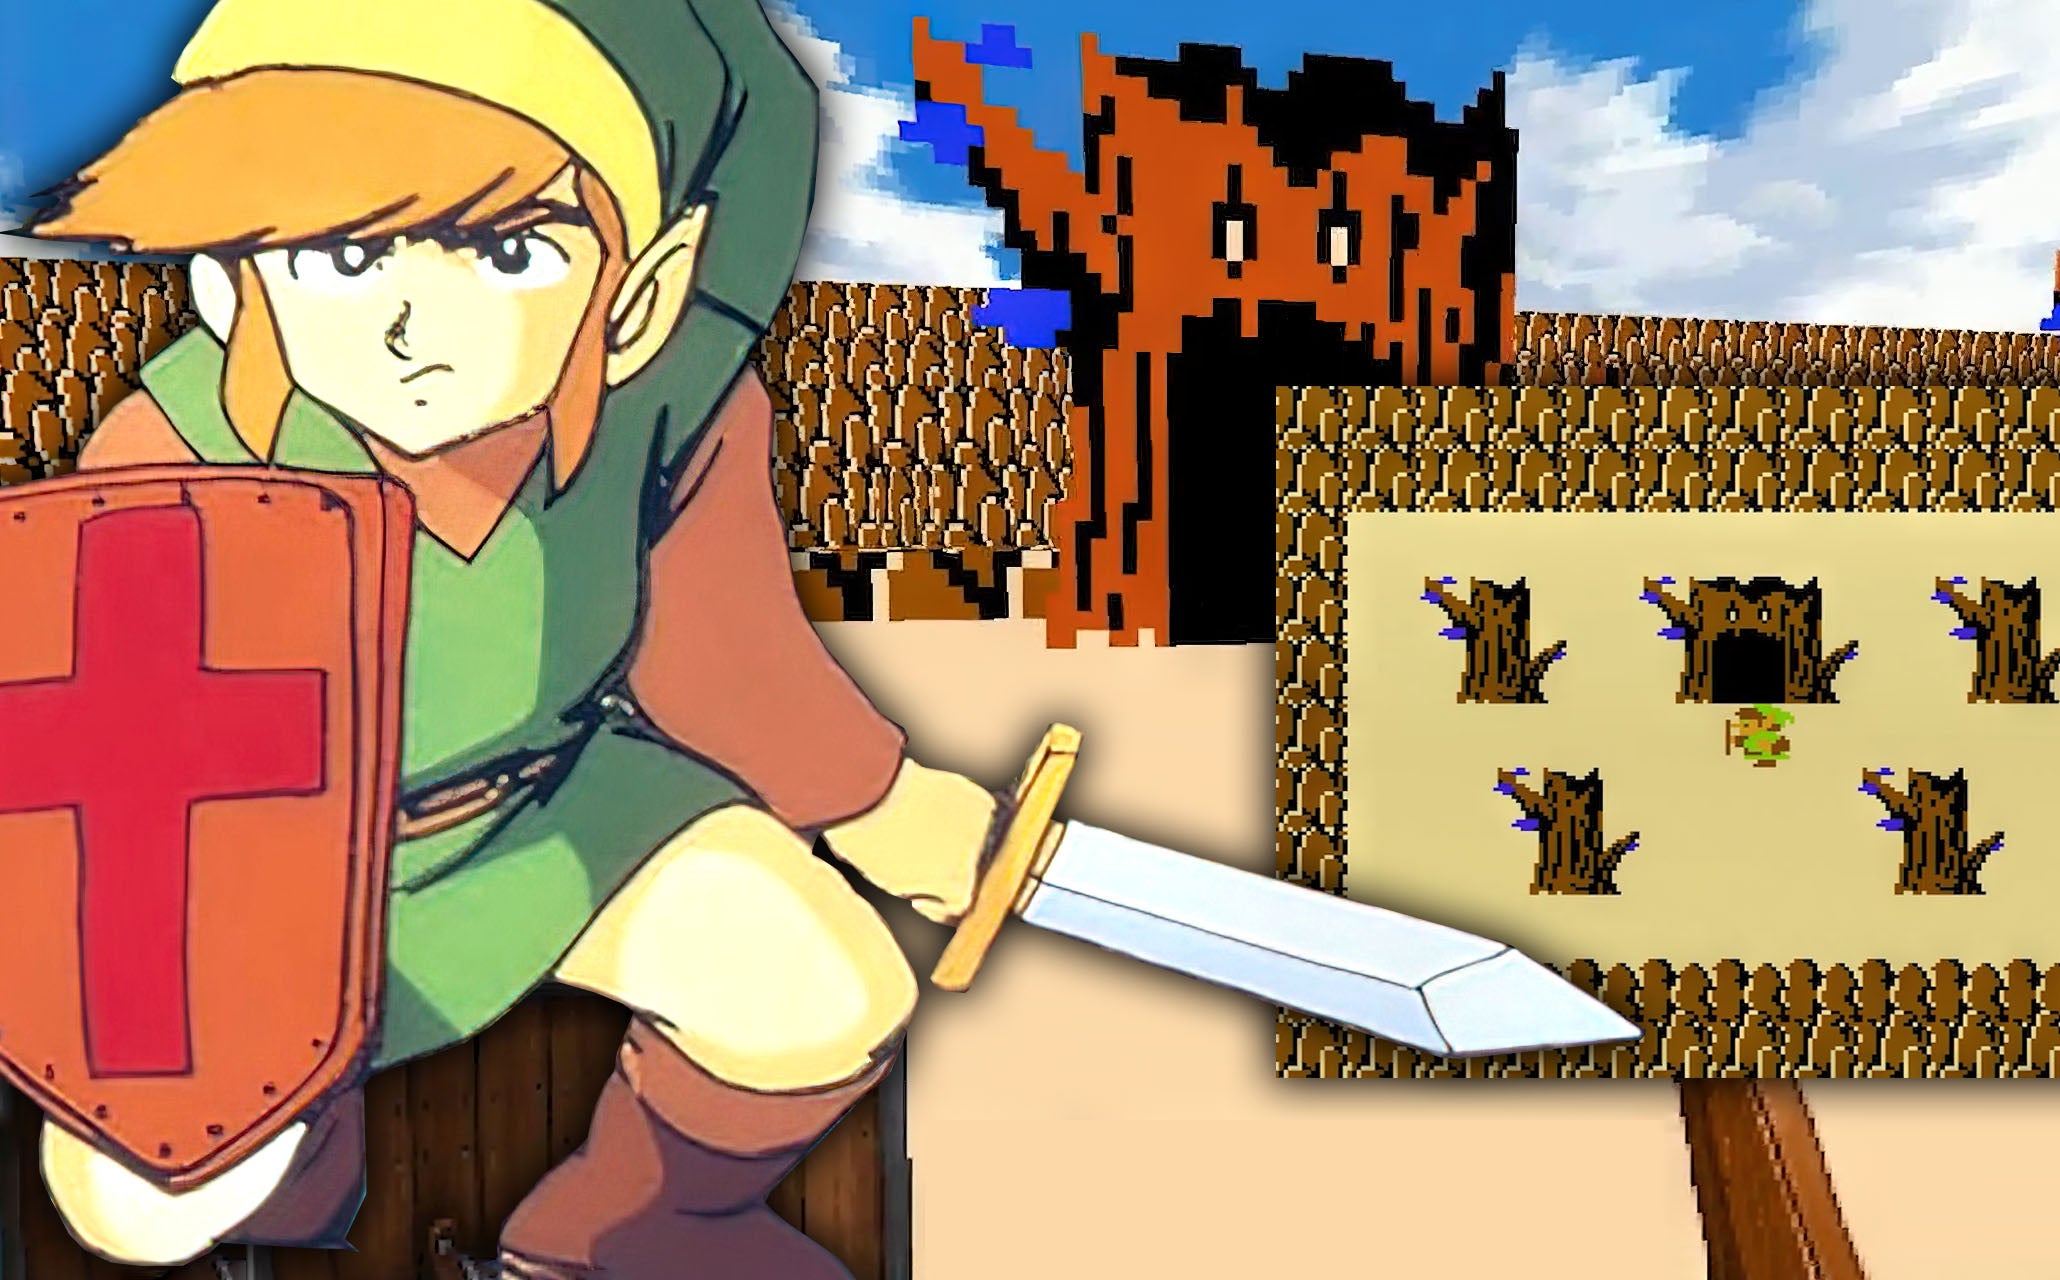  an innovative mod that brings the NES version of Hyrule to classic Doom.